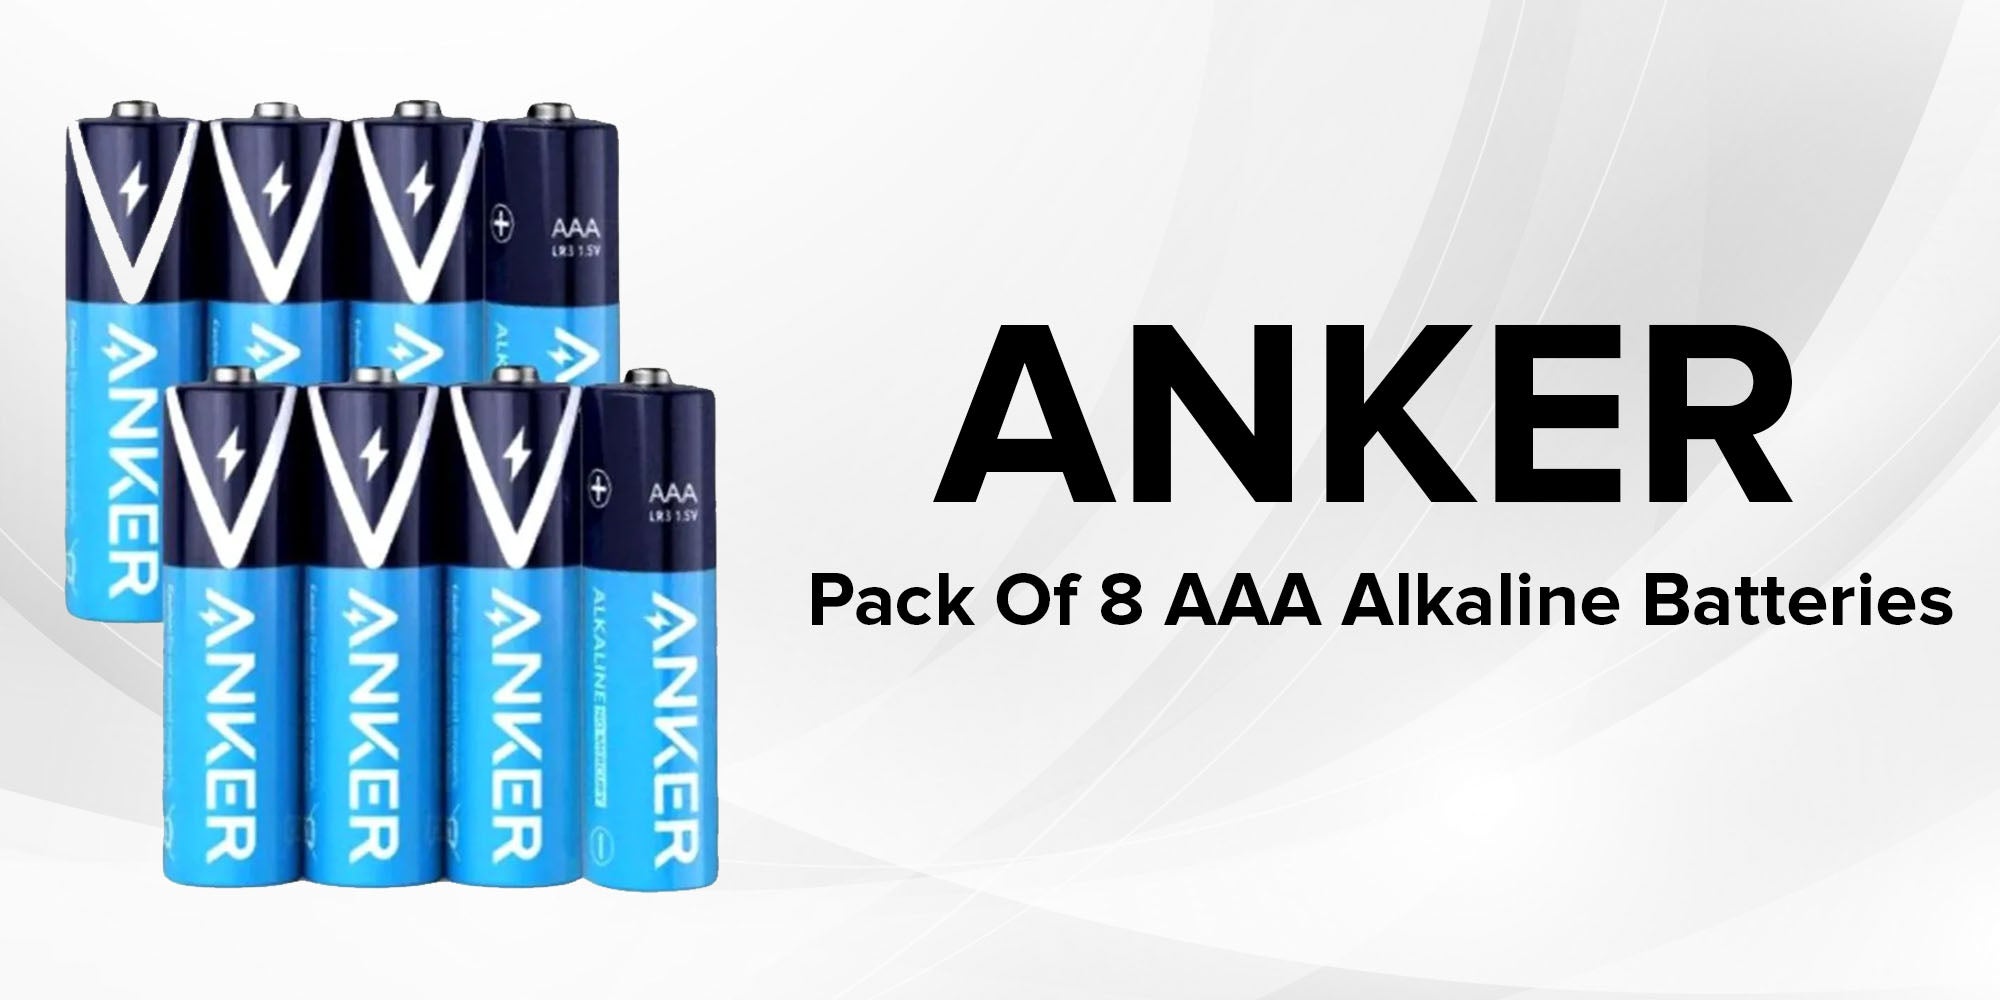 N37389996A 1 Anker &Lt;H1 Class=&Quot;Product_Title Entry-Title&Quot;&Gt;&Lt;/H1&Gt; &Lt;H1&Gt;Anker Aaa8 Alkaline Battery 8 Pack - B1820H13&Lt;/H1&Gt; Https://Www.youtube.com/Watch?V=H8Eld2V51Cw &Lt;Ul&Gt; &Lt;Li&Gt;Built With Premium Components And Advanced Engineering To Provide Superior Protection&Lt;/Li&Gt; &Lt;Li&Gt;Batteries Are Optimized For A Variety Of Different Devices&Lt;/Li&Gt; &Lt;Li&Gt;Allowing For Improved Efficiency And Universal Compatibility&Lt;/Li&Gt; &Lt;Li&Gt;High-Quality Alkaline Batteries Last Longer Than Conventional Batteries&Lt;/Li&Gt; &Lt;Li&Gt;Reliable Portable Power That Maximizes Fun, Productivity And Safety&Lt;/Li&Gt; &Lt;/Ul&Gt; &Lt;H1 Class=&Quot;Product_Title Entry-Title&Quot;&Gt;&Lt;A Style=&Quot;Font-Size: 16Px;&Quot; Href=&Quot;Https://Lablaab.com/Product-Category/Beauty-And-Personal-Care/&Quot;&Gt;More Products&Lt;/A&Gt;&Lt;/H1&Gt; &Lt;B&Gt;We Also Provide International Wholesale And Retail Shipping To All Gcc Countries: Saudi Arabia, Qatar, Oman, Kuwait, Bahrain. &Lt;/B&Gt; Anker Aaa8 Alkaline Battery Anker Aaa8 Alkaline Battery 8 Pack - B1820H13